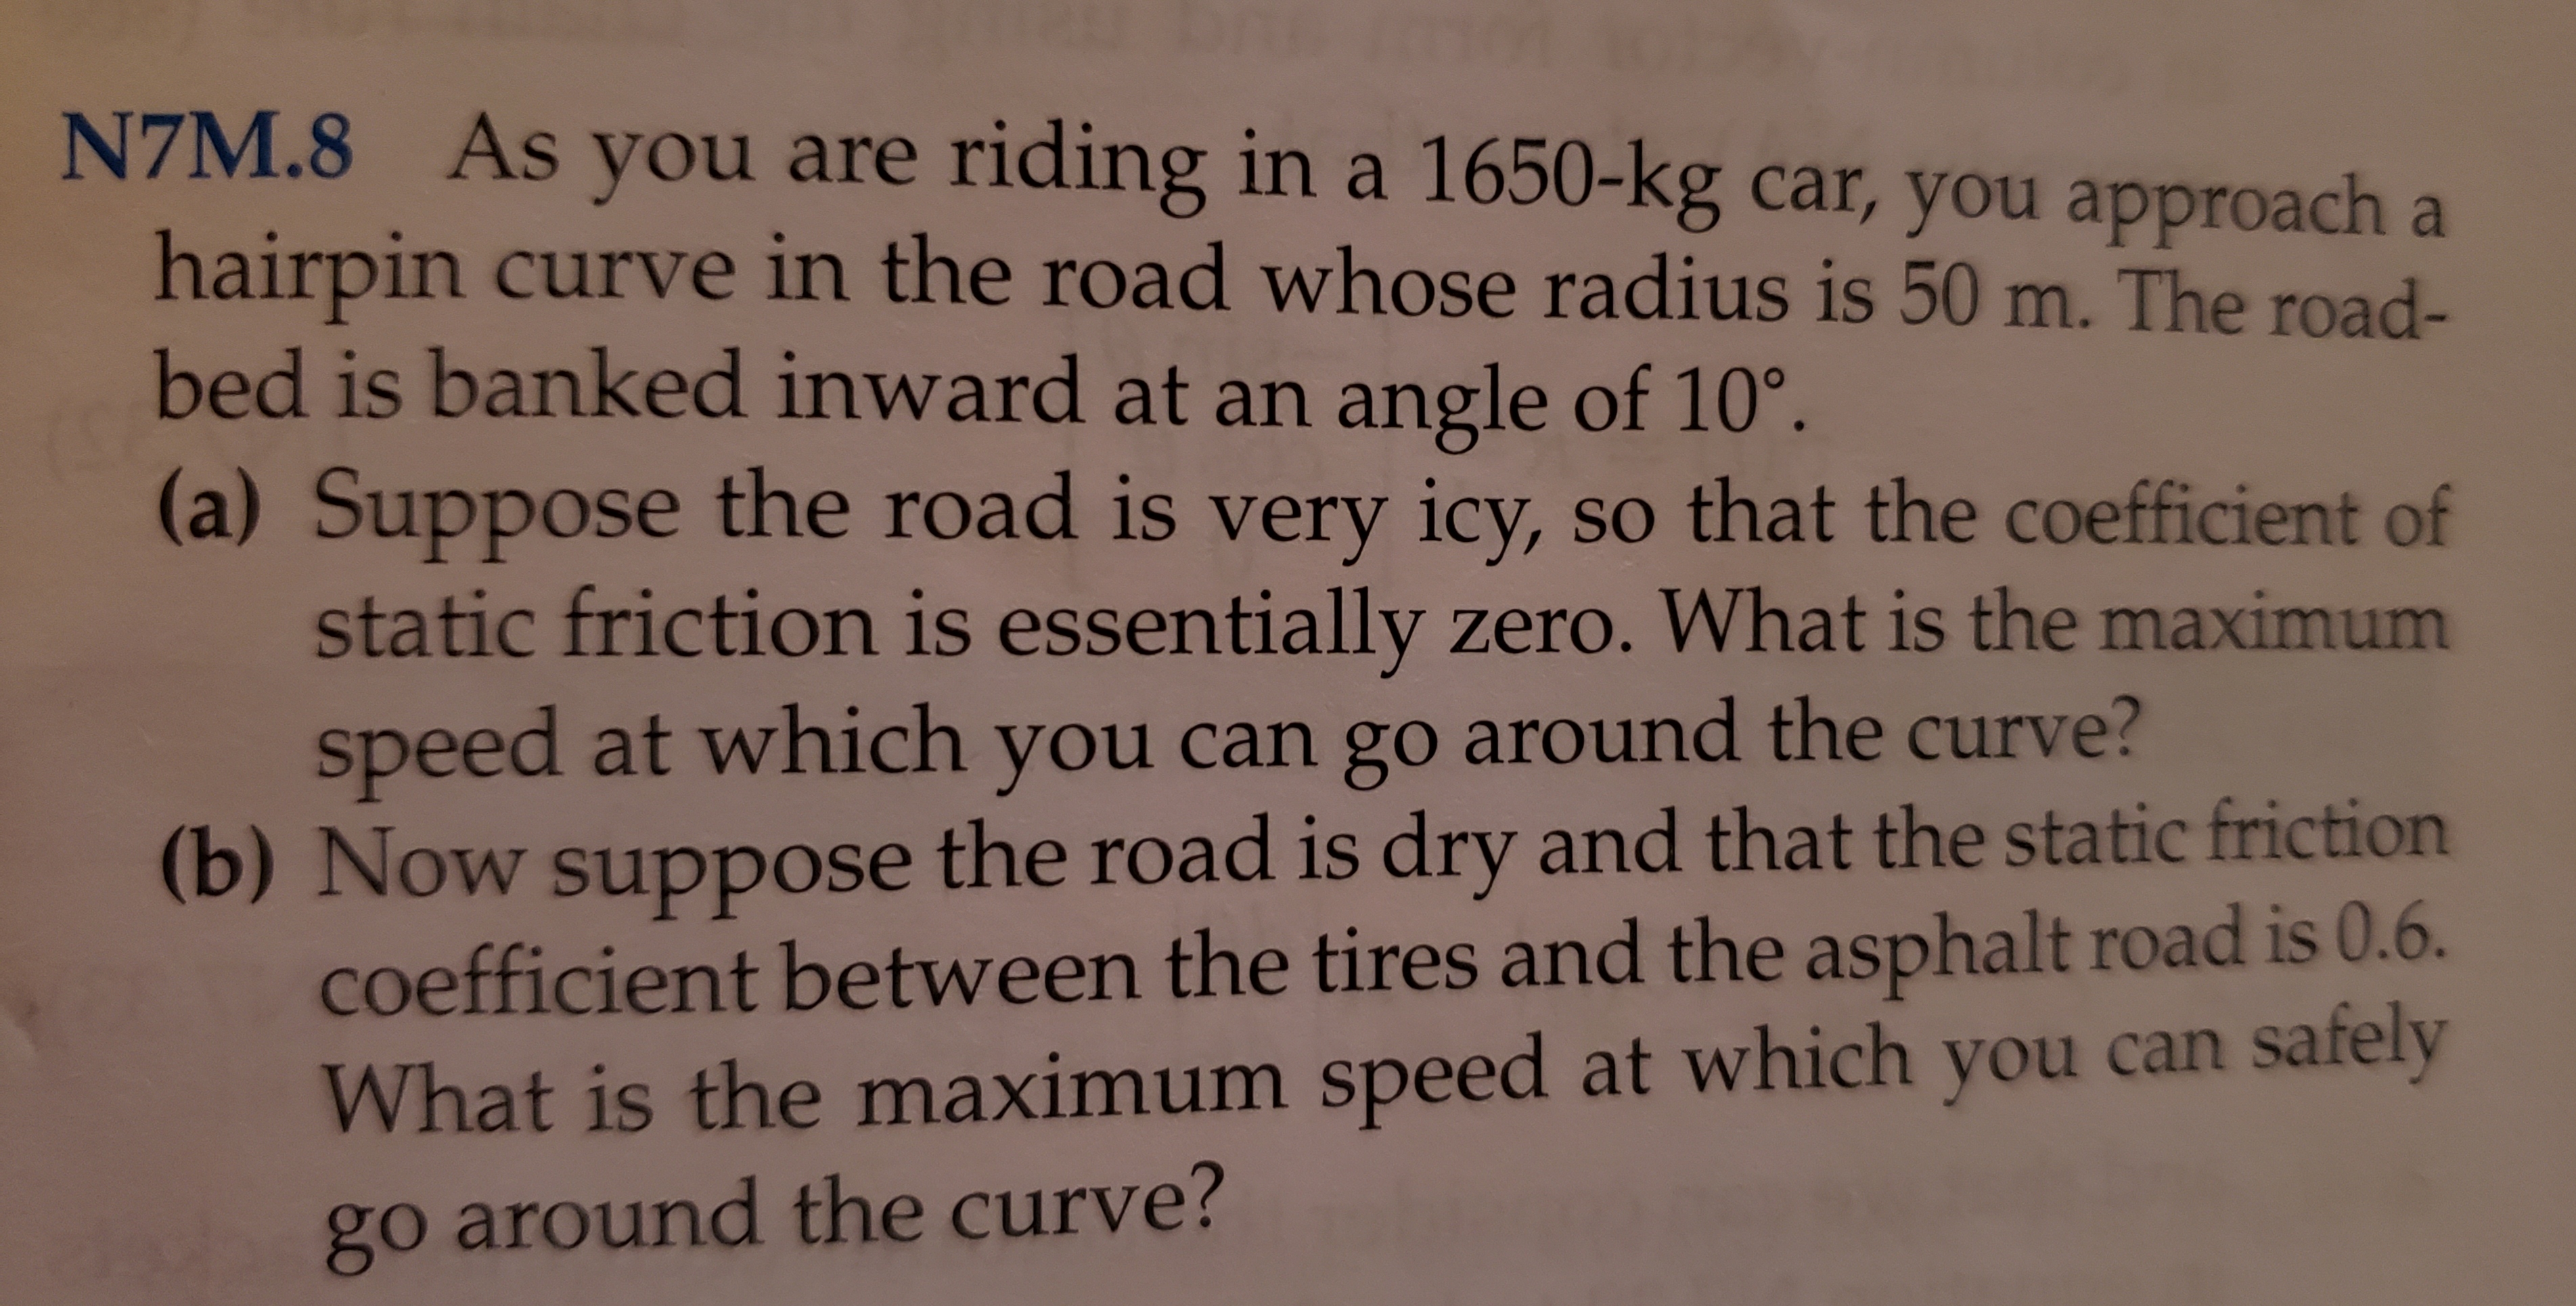 As you are riding in a 1650-kg car, you approach a
N7M.8
hairpin curve in the road whose radius is 50 m. The road-
bed is banked inward at an angle of 10°
(a) Suppose the road is very icy, so that the coefficient of
static friction is essentially zero. What is the maximum
speed at which you can go around the curve?
(b) Now suppose the road is dry and that the static friction
coefficient between the tires and the asphalt road is 0.6.
What is the maximum speed at which you can safely
go around the curve?
